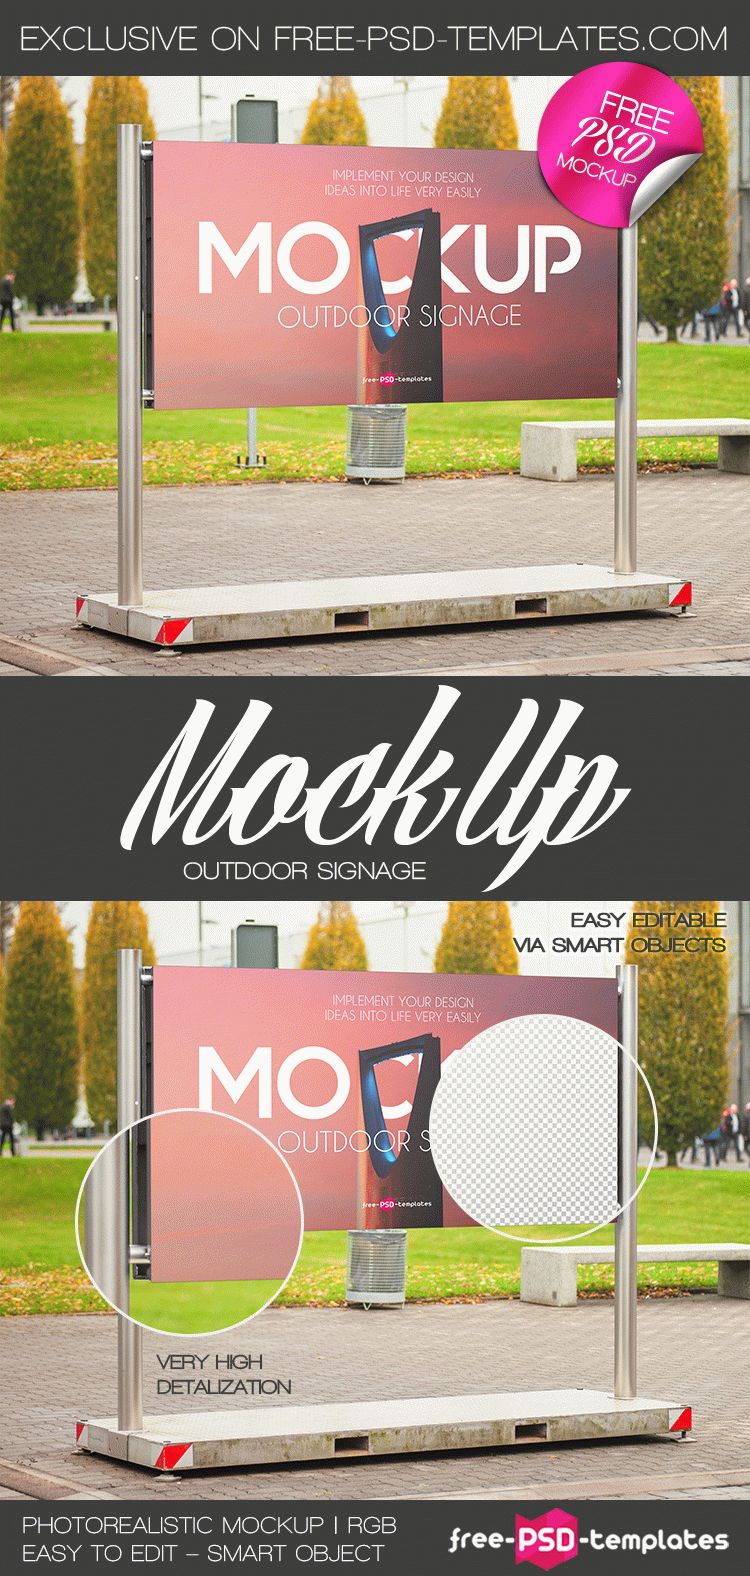 Download Free Outdoor Signage Mock-up in PSD | Free PSD Templates